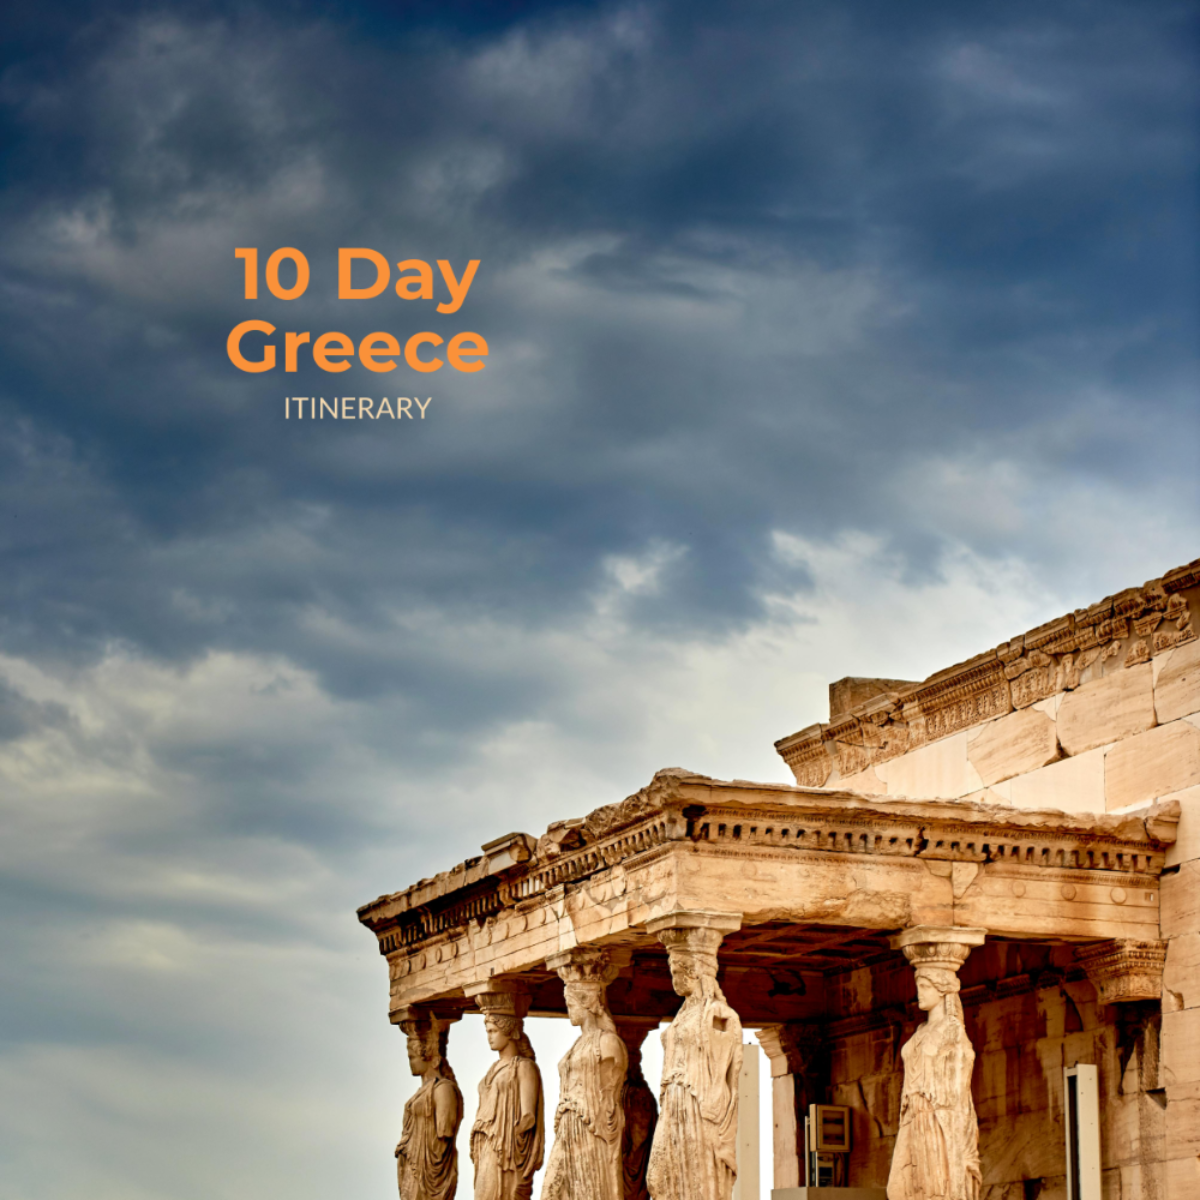 10 Day Greece Itinerary Template